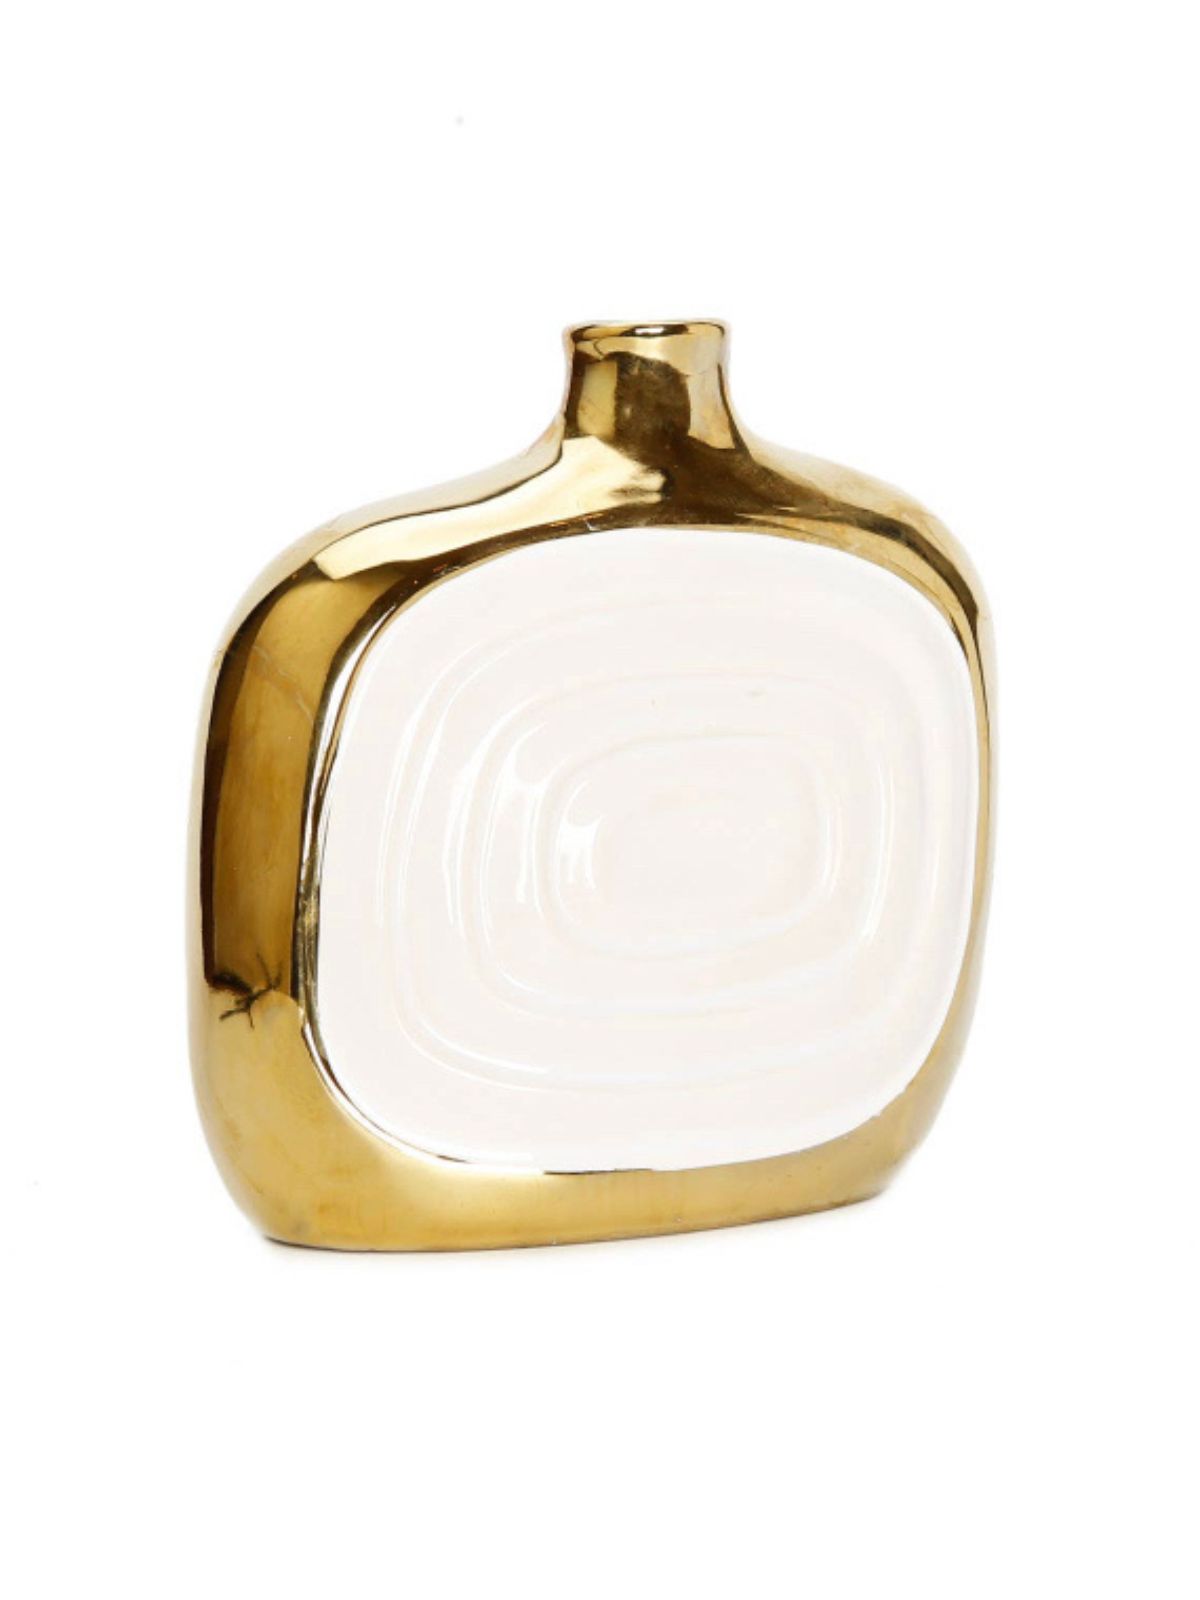 White and Gold Squared Edges Reed Diffuser with Pear and Freesia Scent sold by KYA Home Decor.